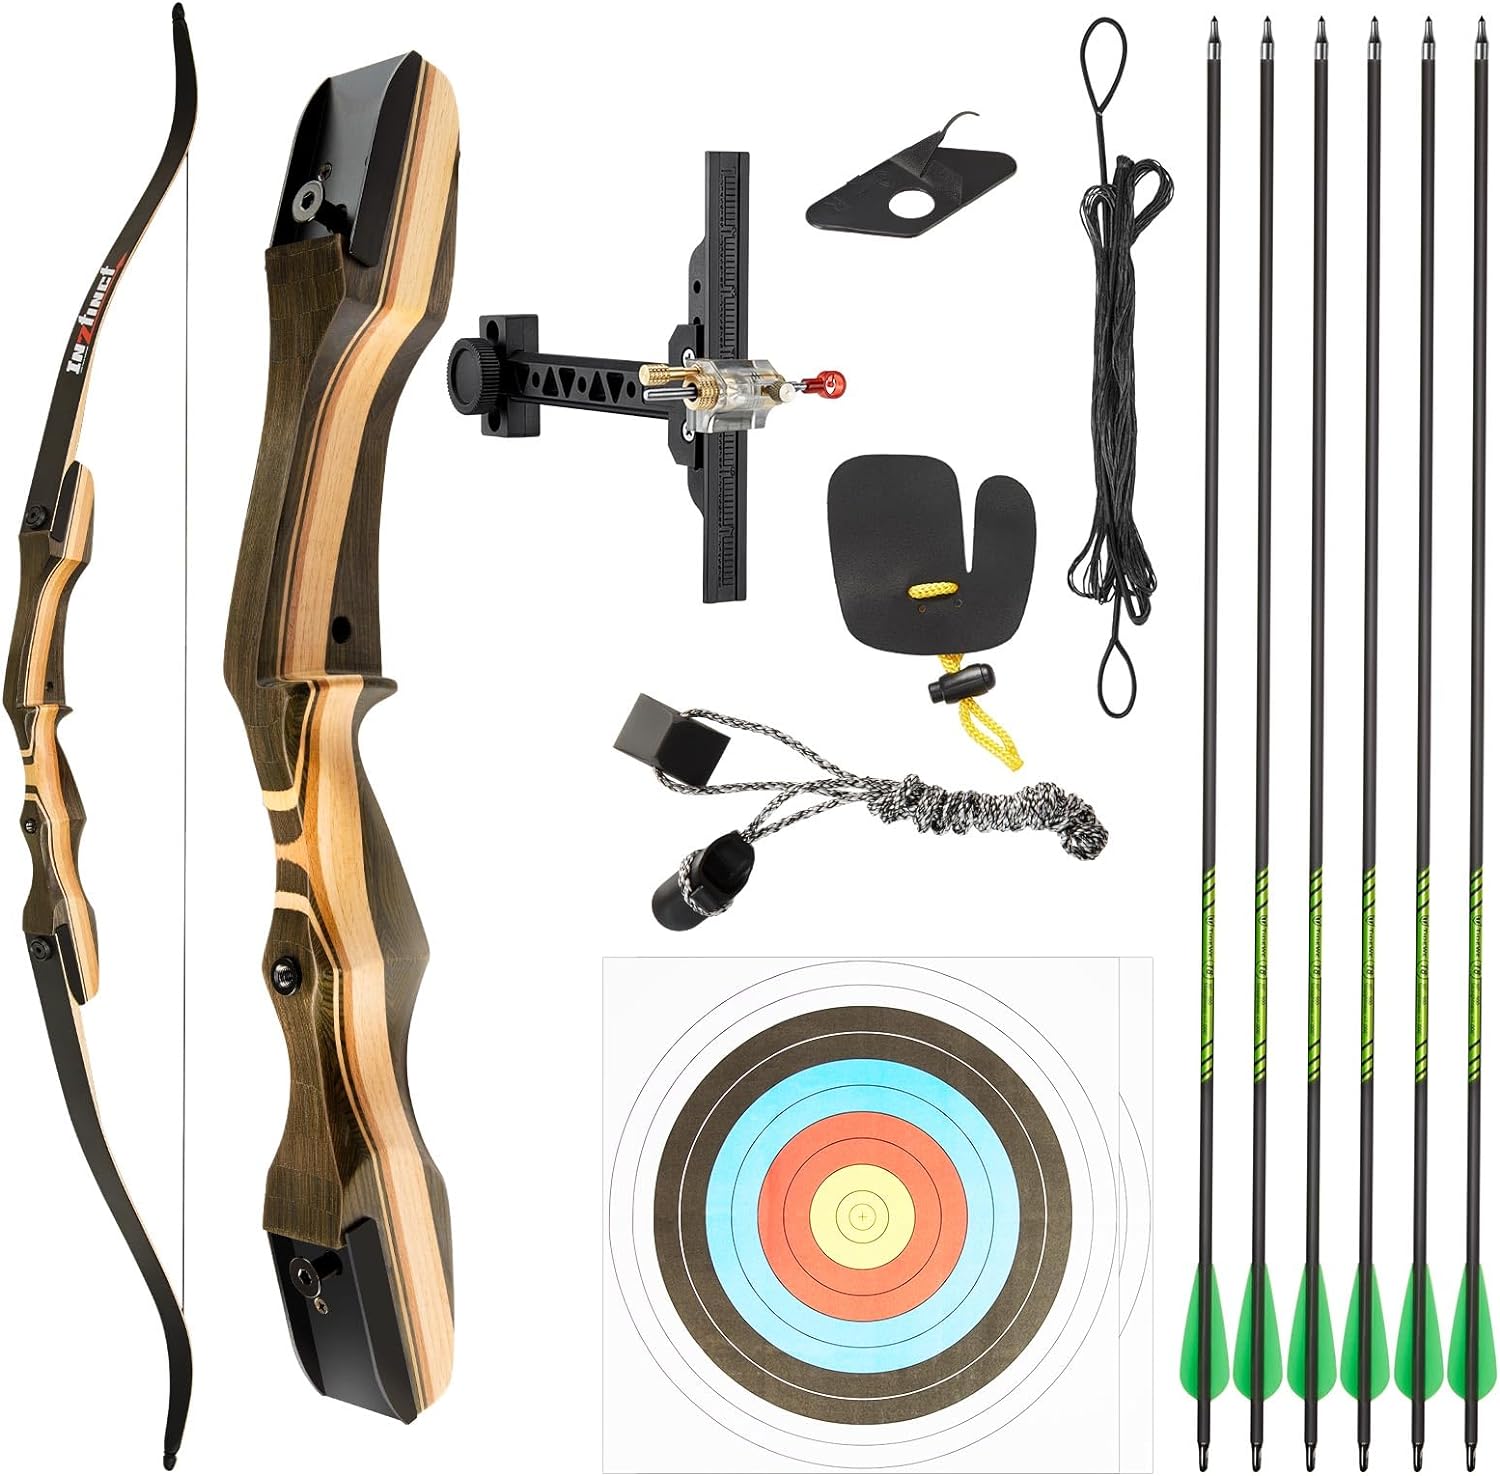 TIDEWE's Recurve Bow and Arrow Set redefines the archery experience by seamlessly combining high performance with ergonomic design for both adults and kids.